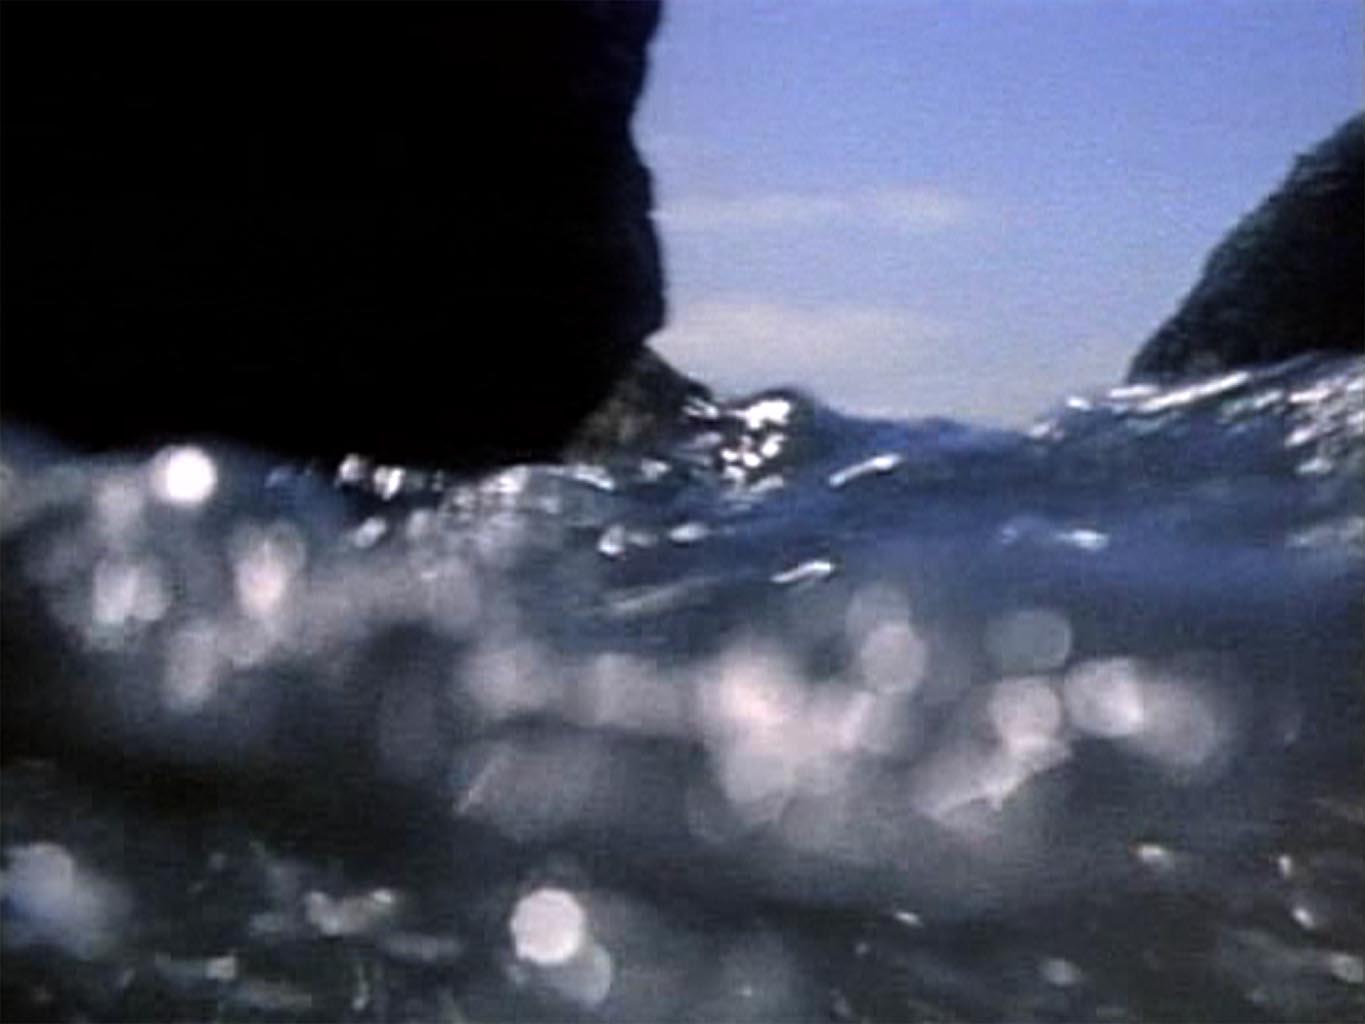 Image from Pond and Waterfall - film by Barbara Hammer